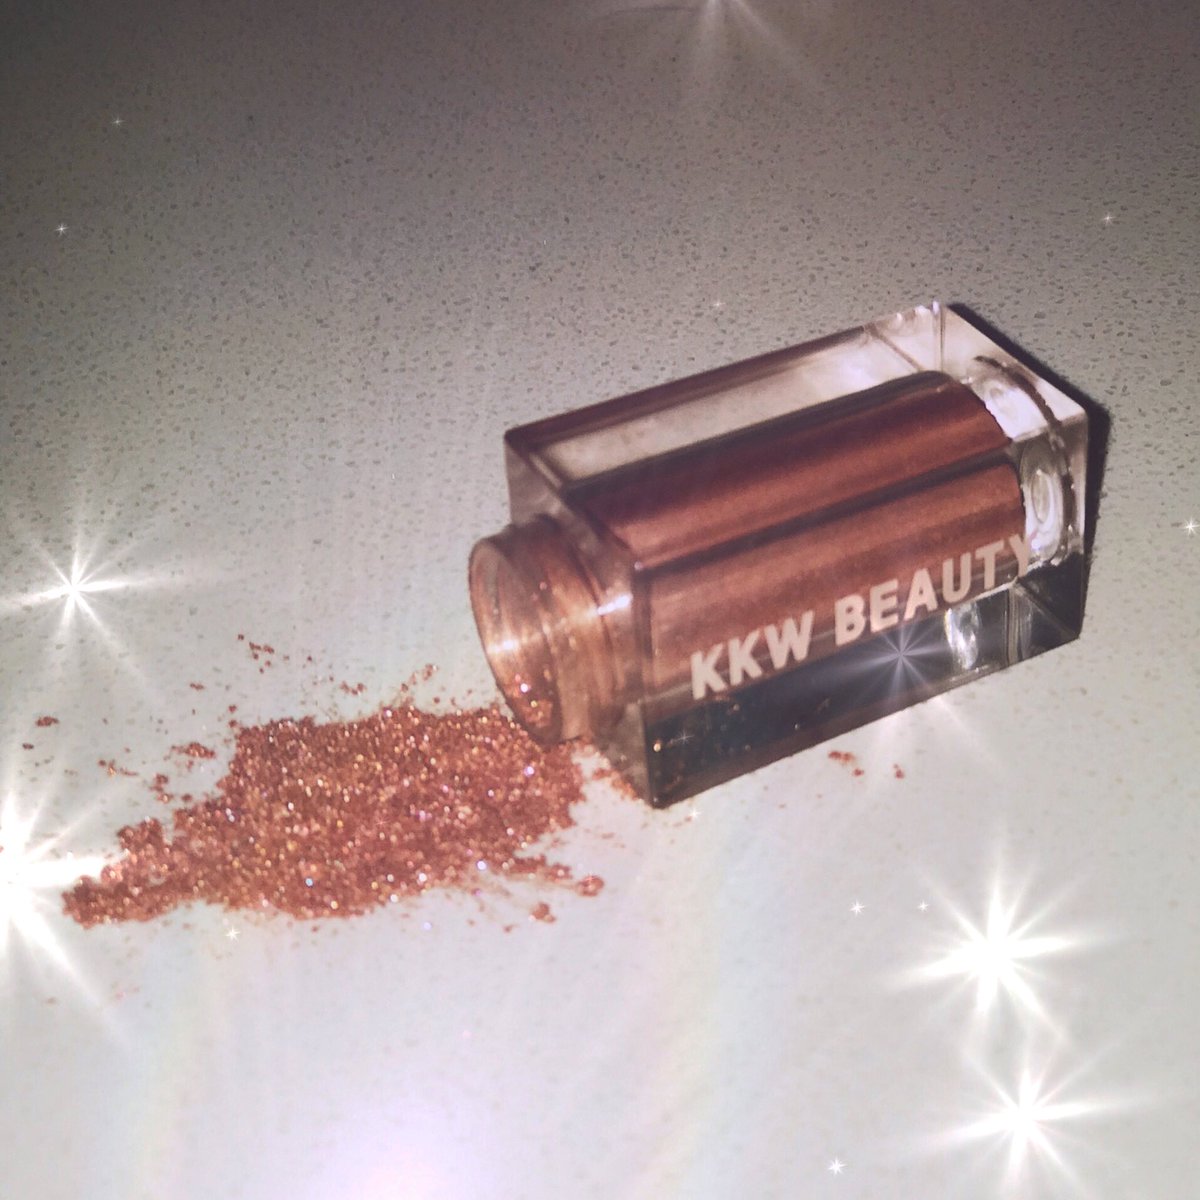 Ultralight Beams loose pigment & highlighter available now on https://t.co/aIjp1MBlpZ https://t.co/hwo9PilDXZ